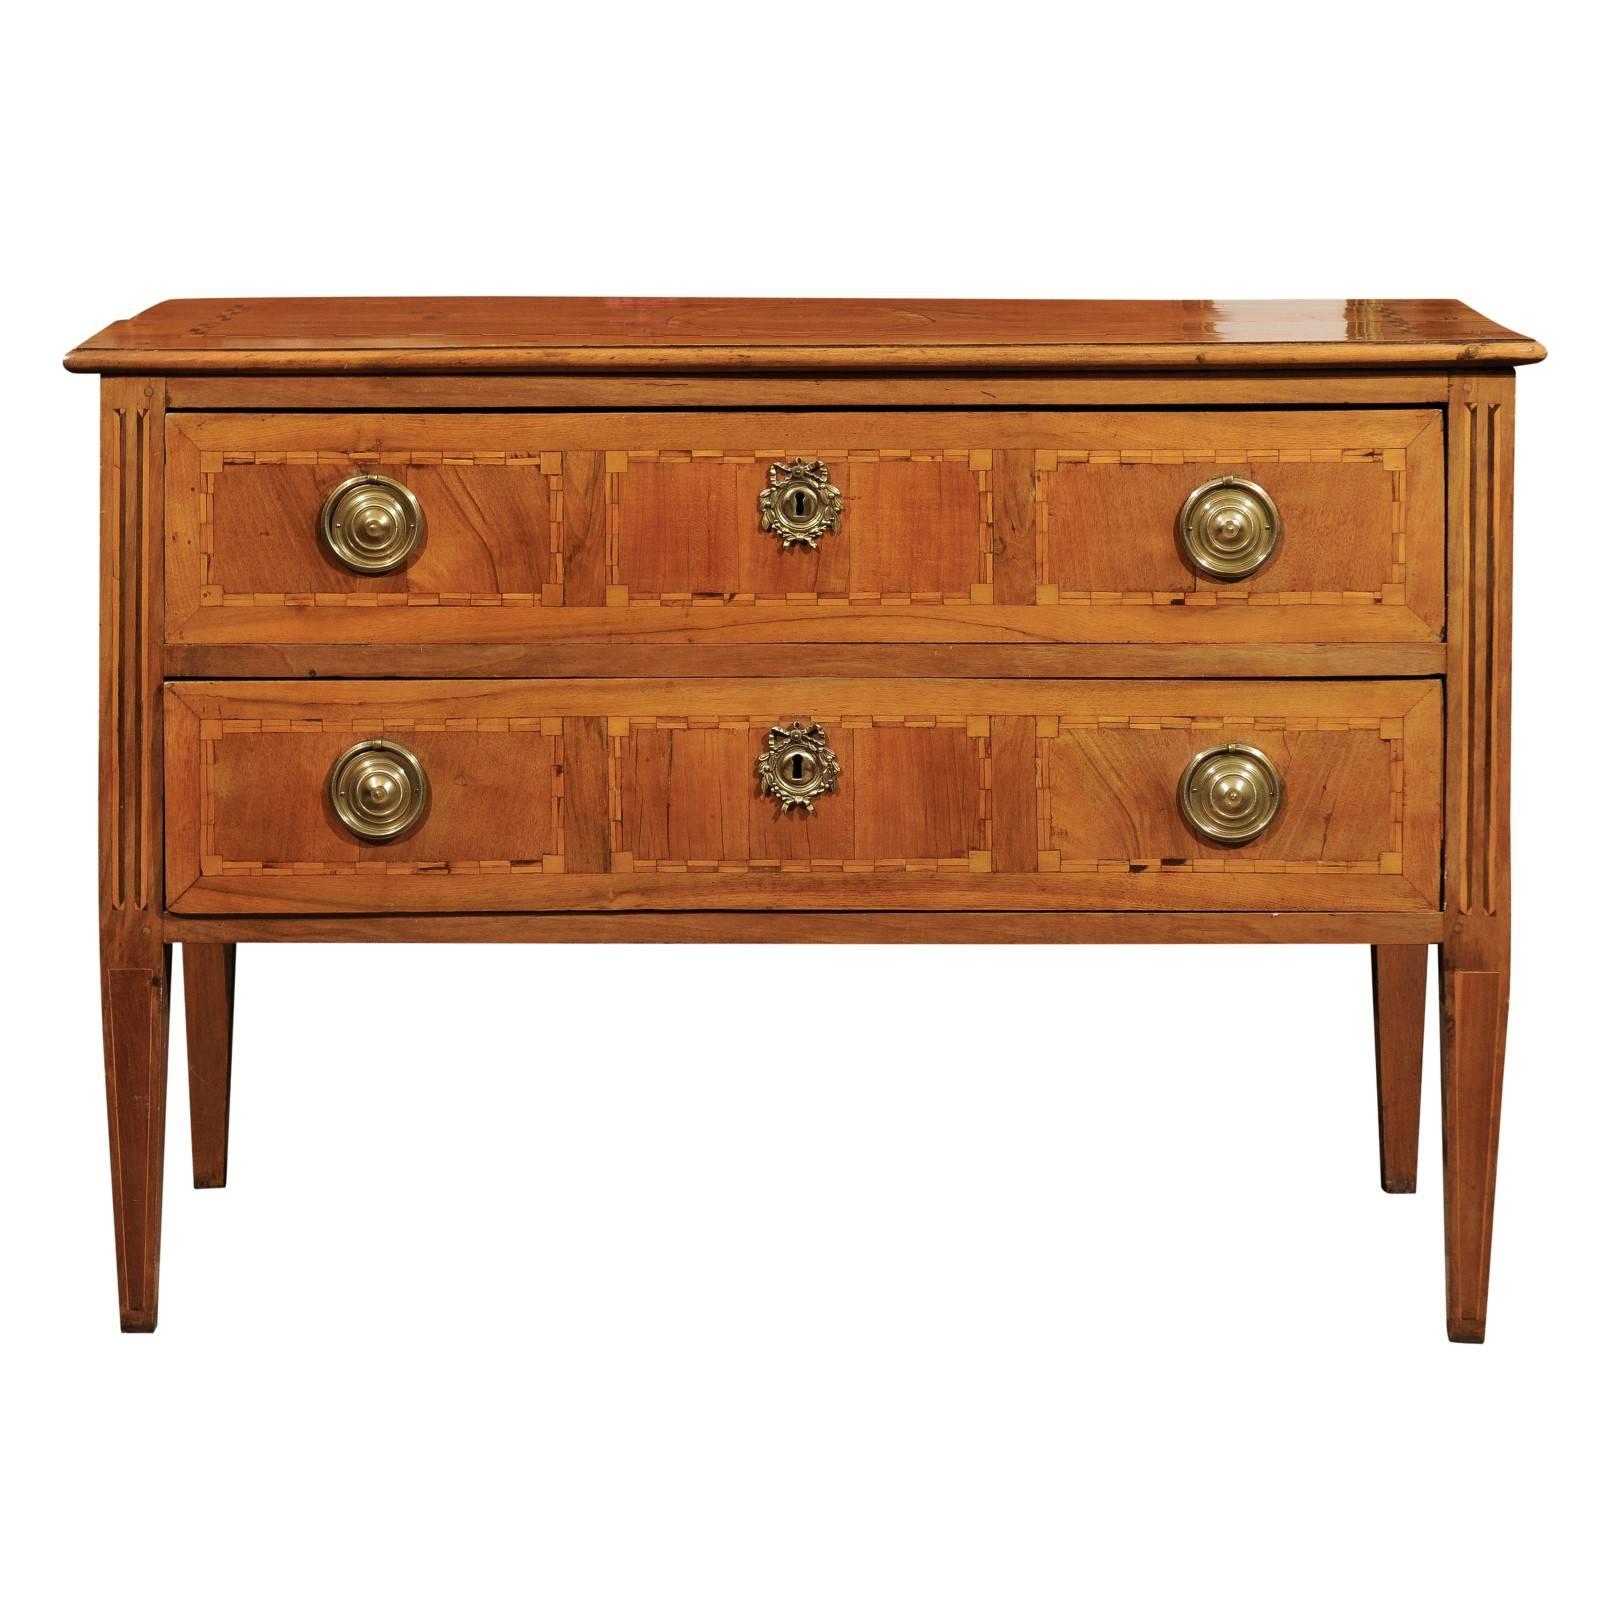 Late 18th Century French Louis XVI Two-Drawer Commode with Parquetry Inlay